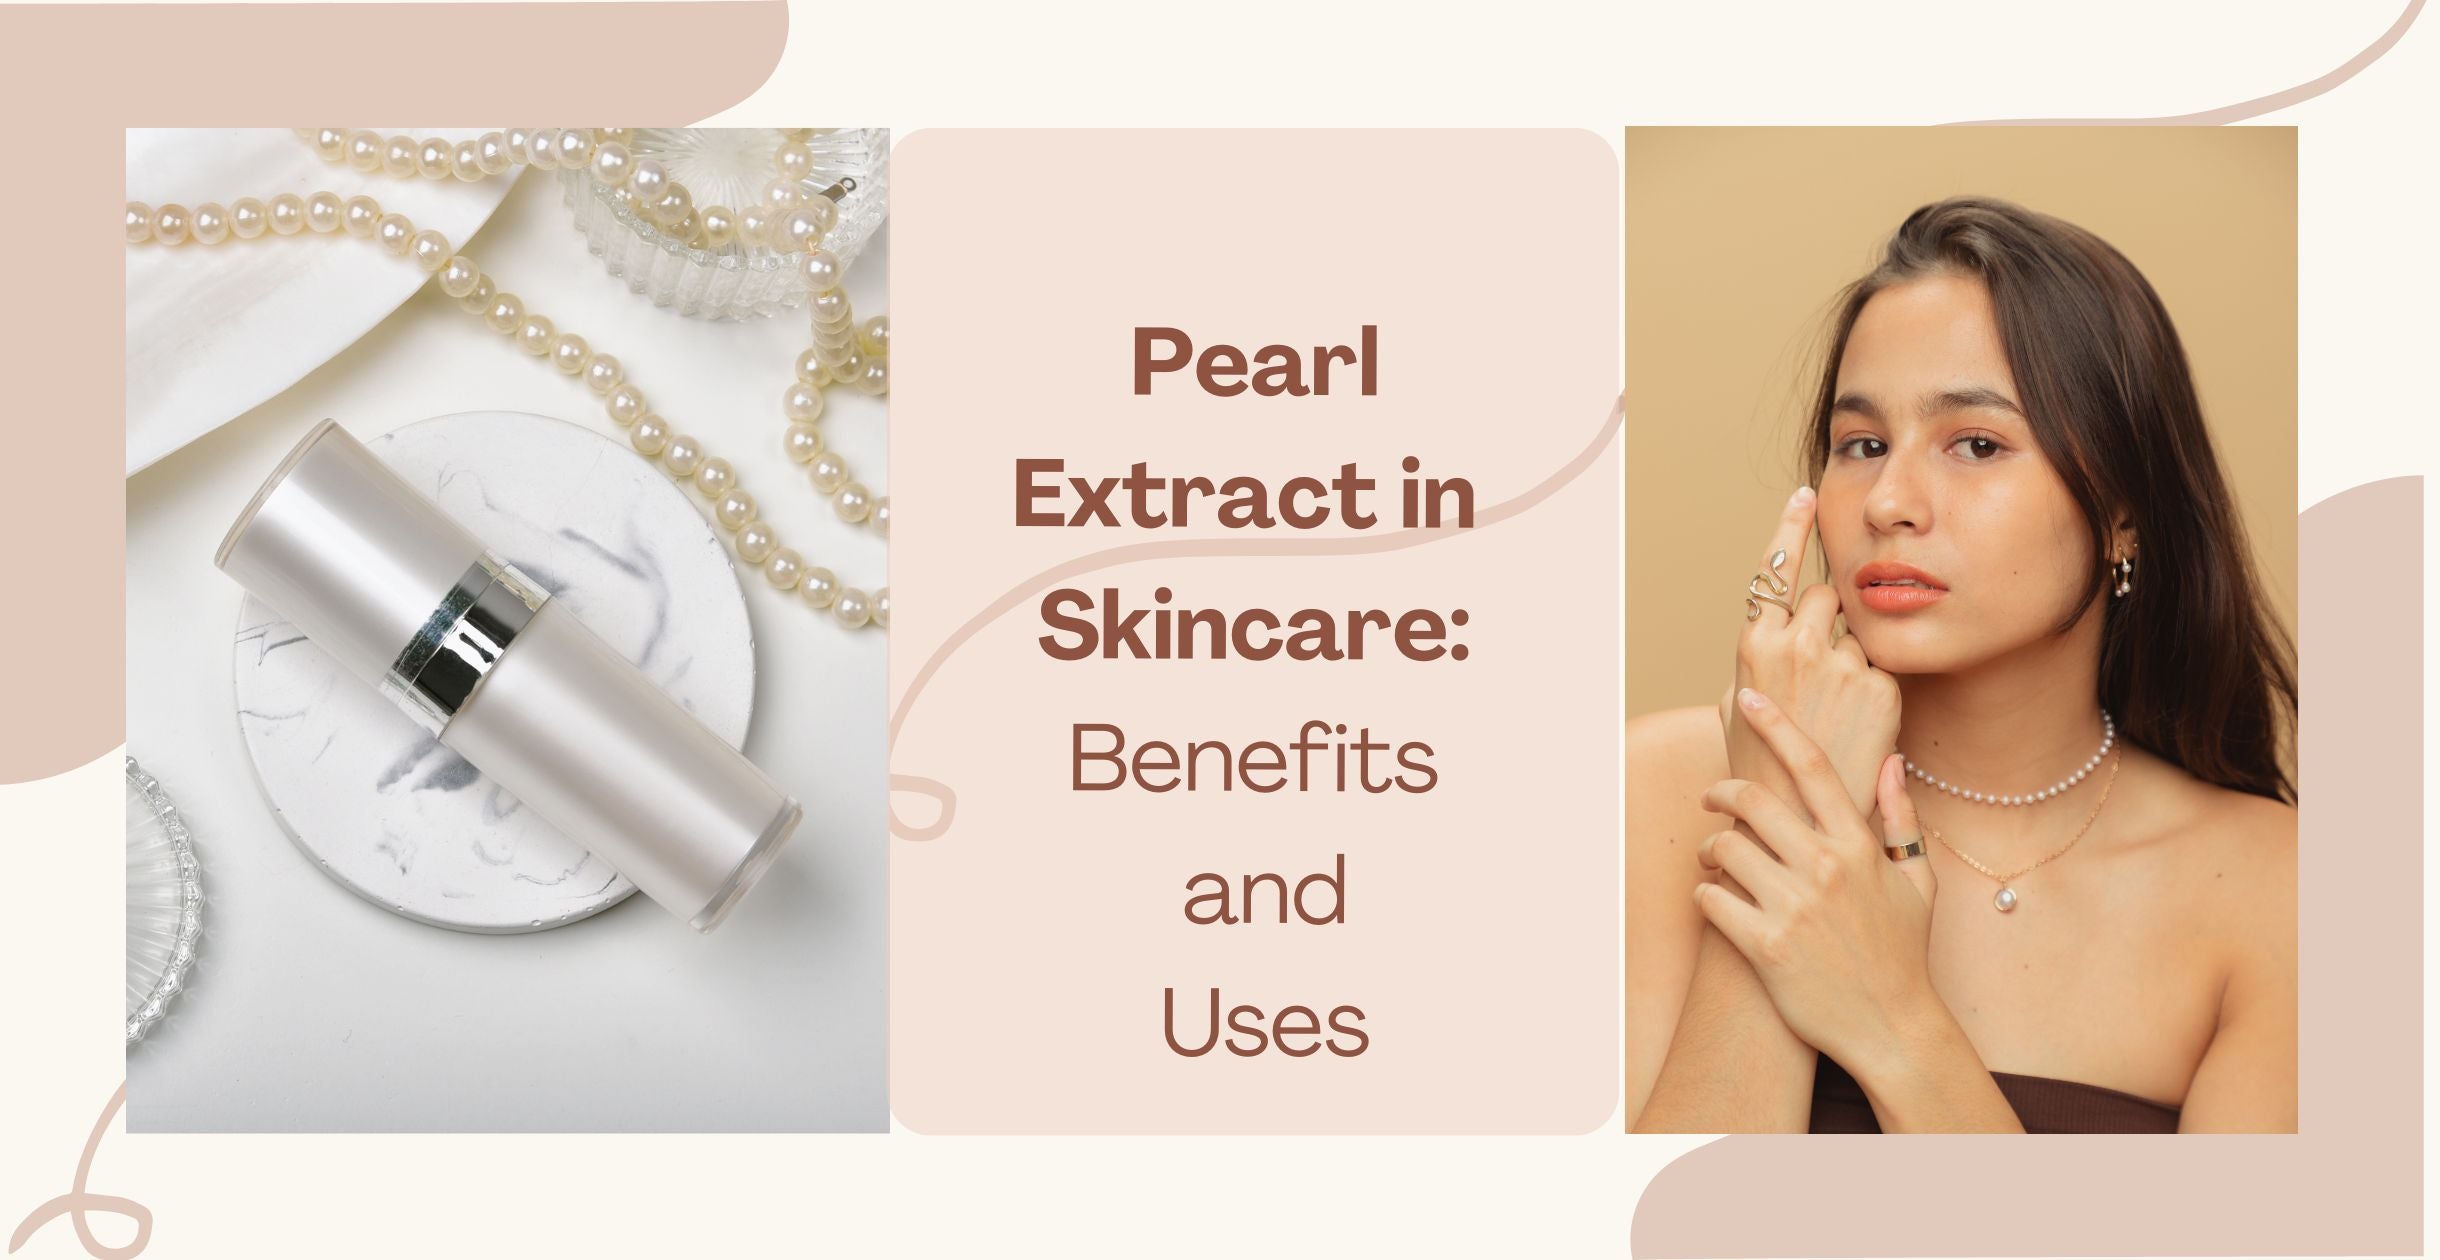 Pearl Extract in Skincare: Benefits and Uses